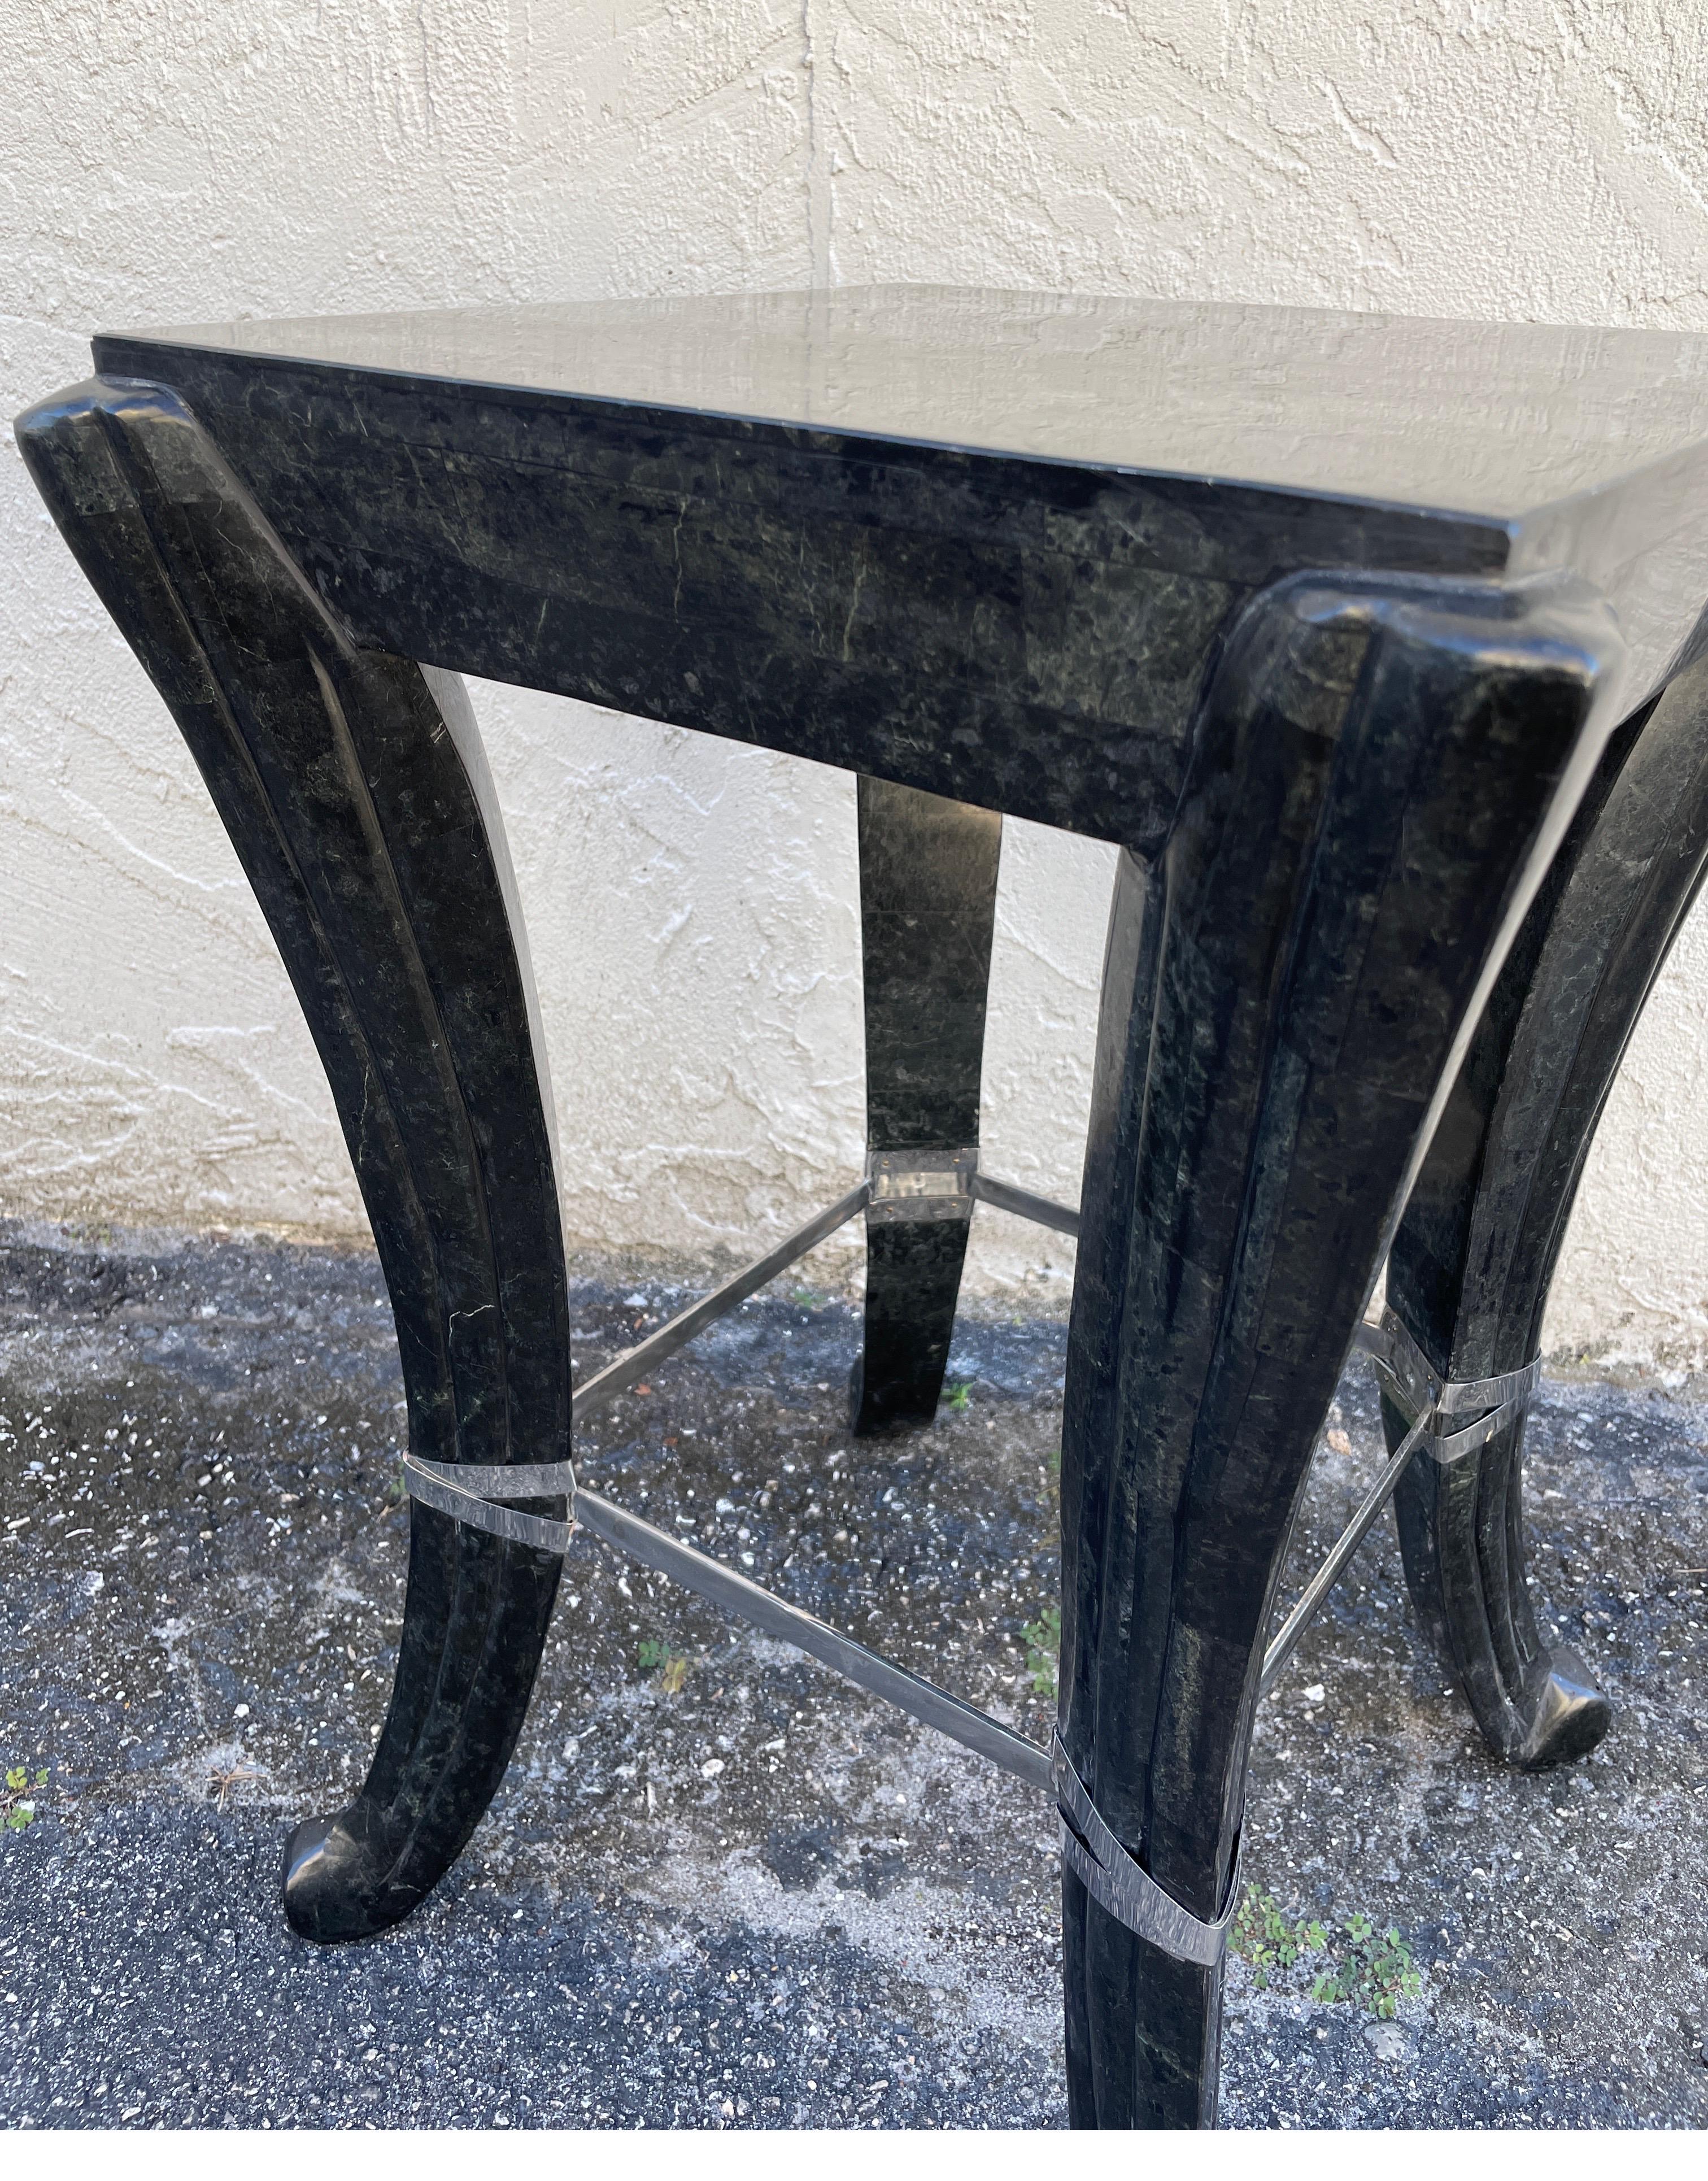 Art Deco style tessellated black marble drinks table with silver plate straps around legs.